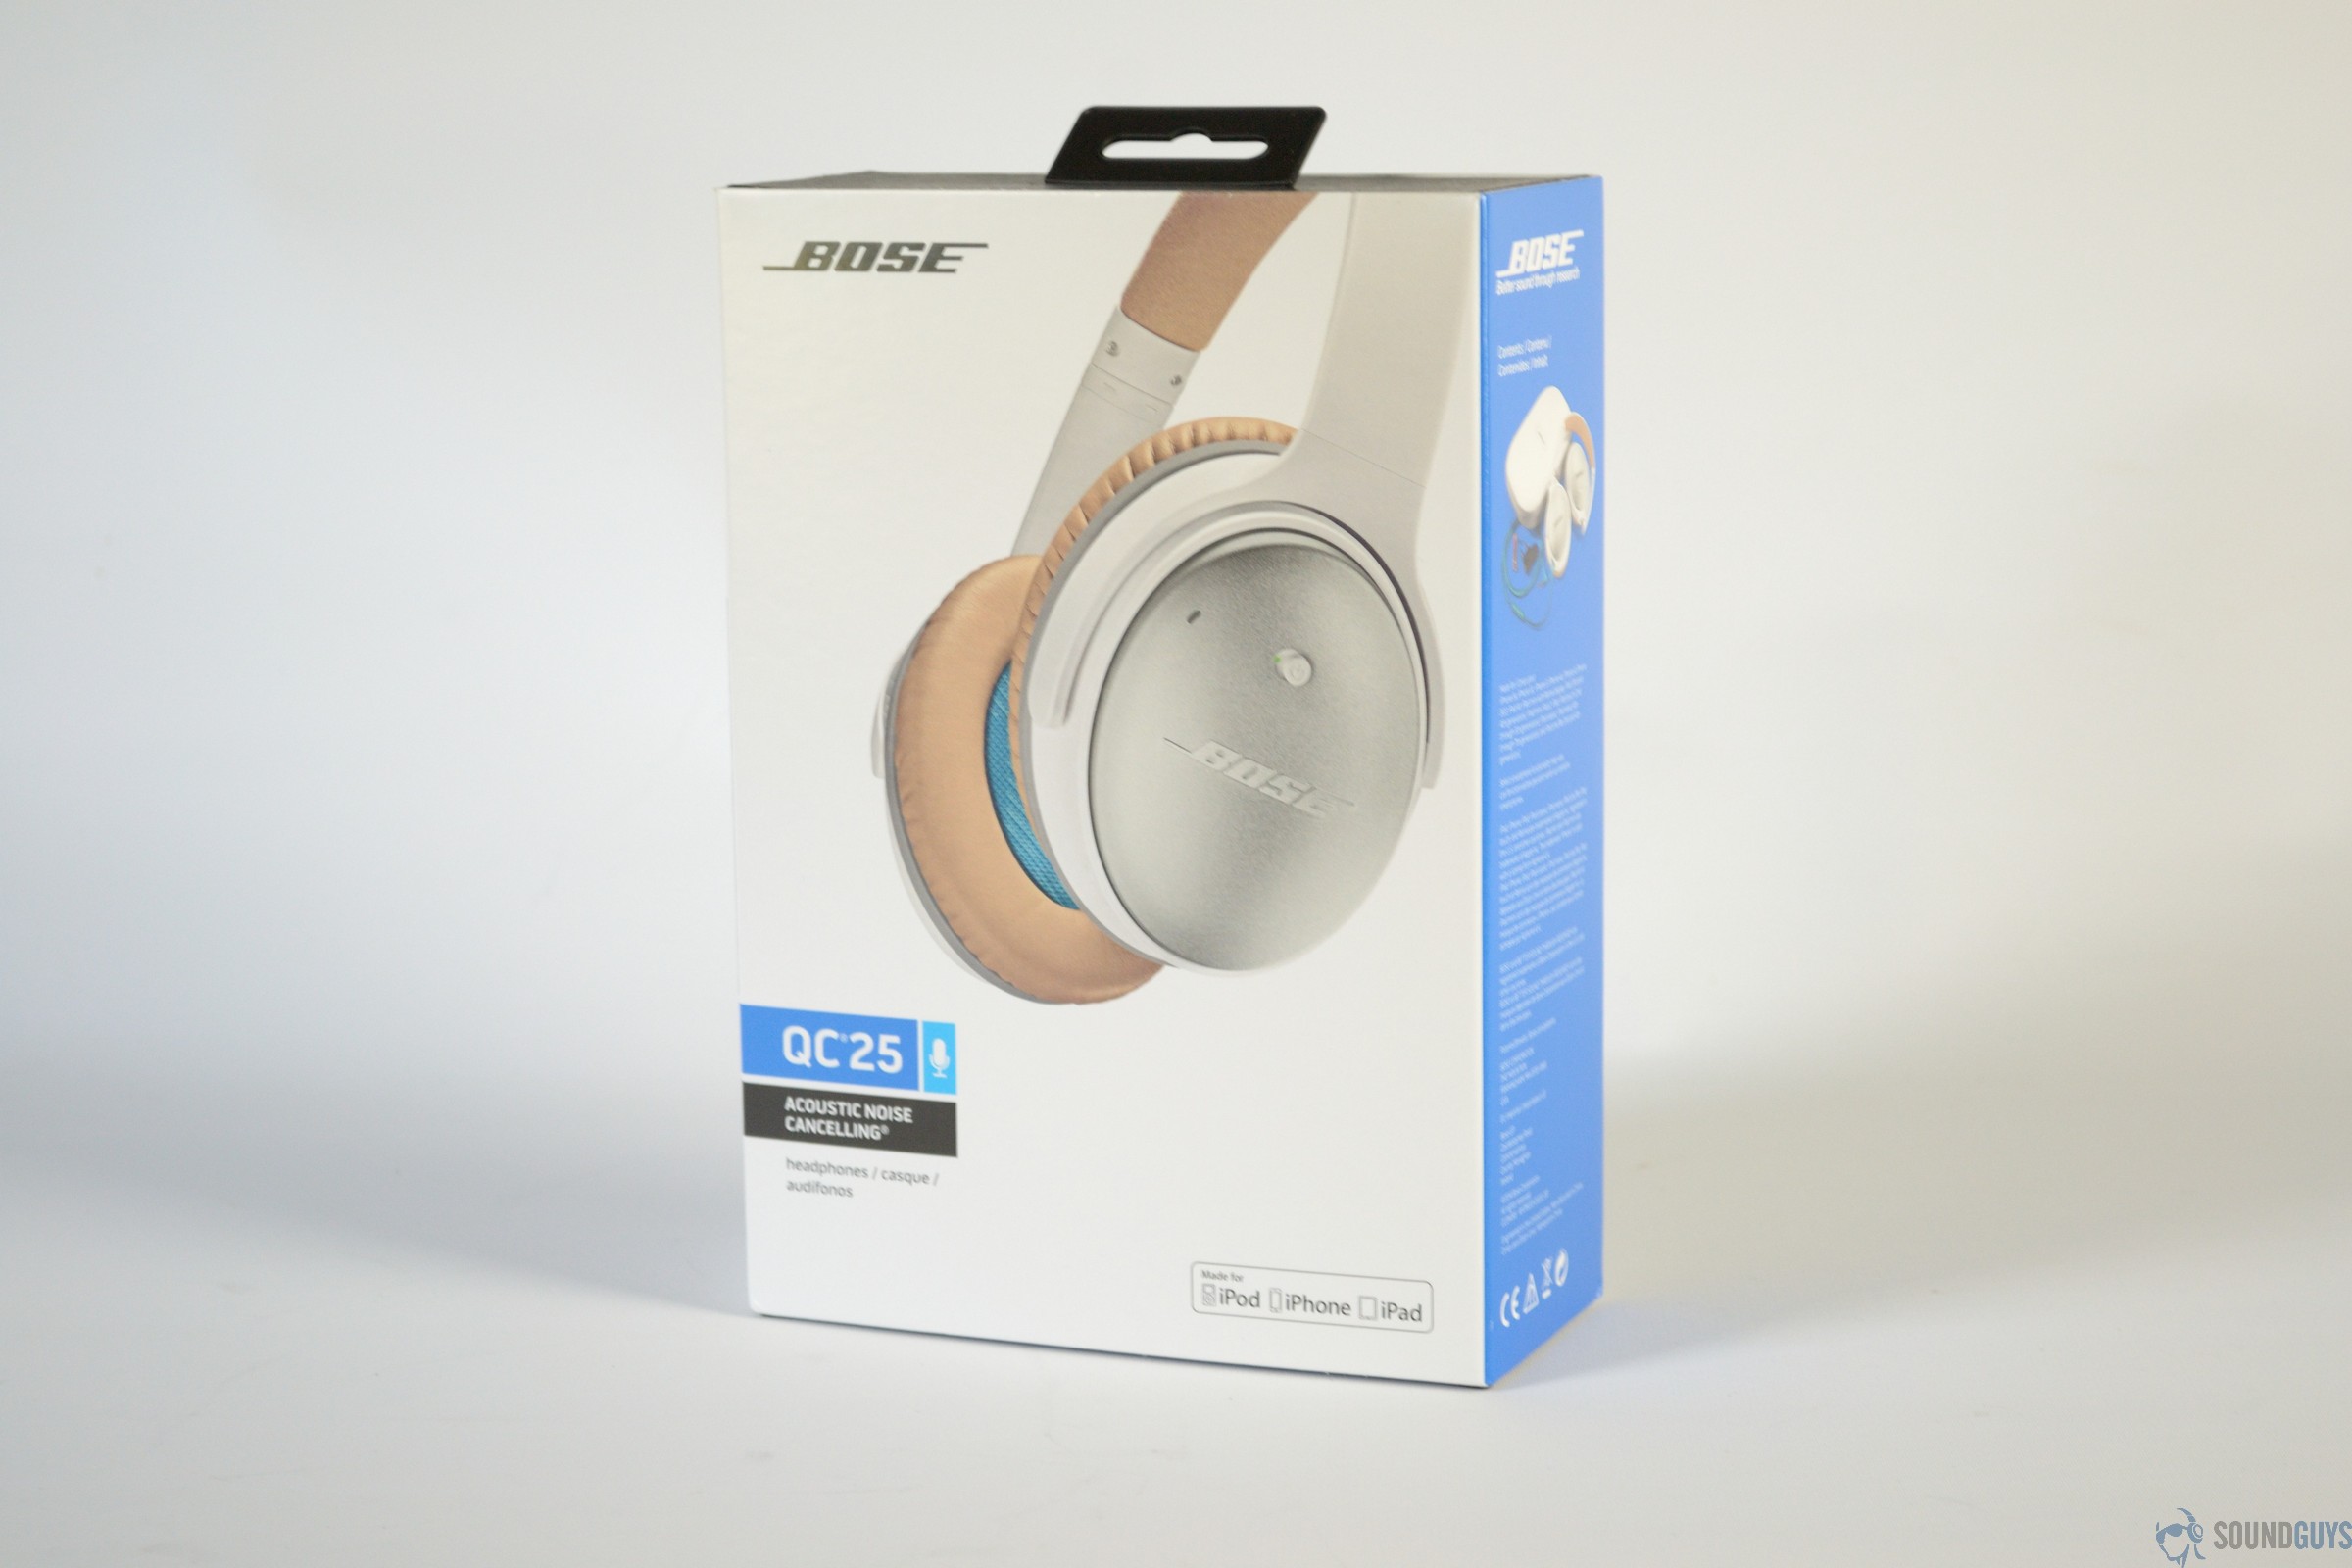 A photo of the Bose QuietComfort 25 in their packaging.